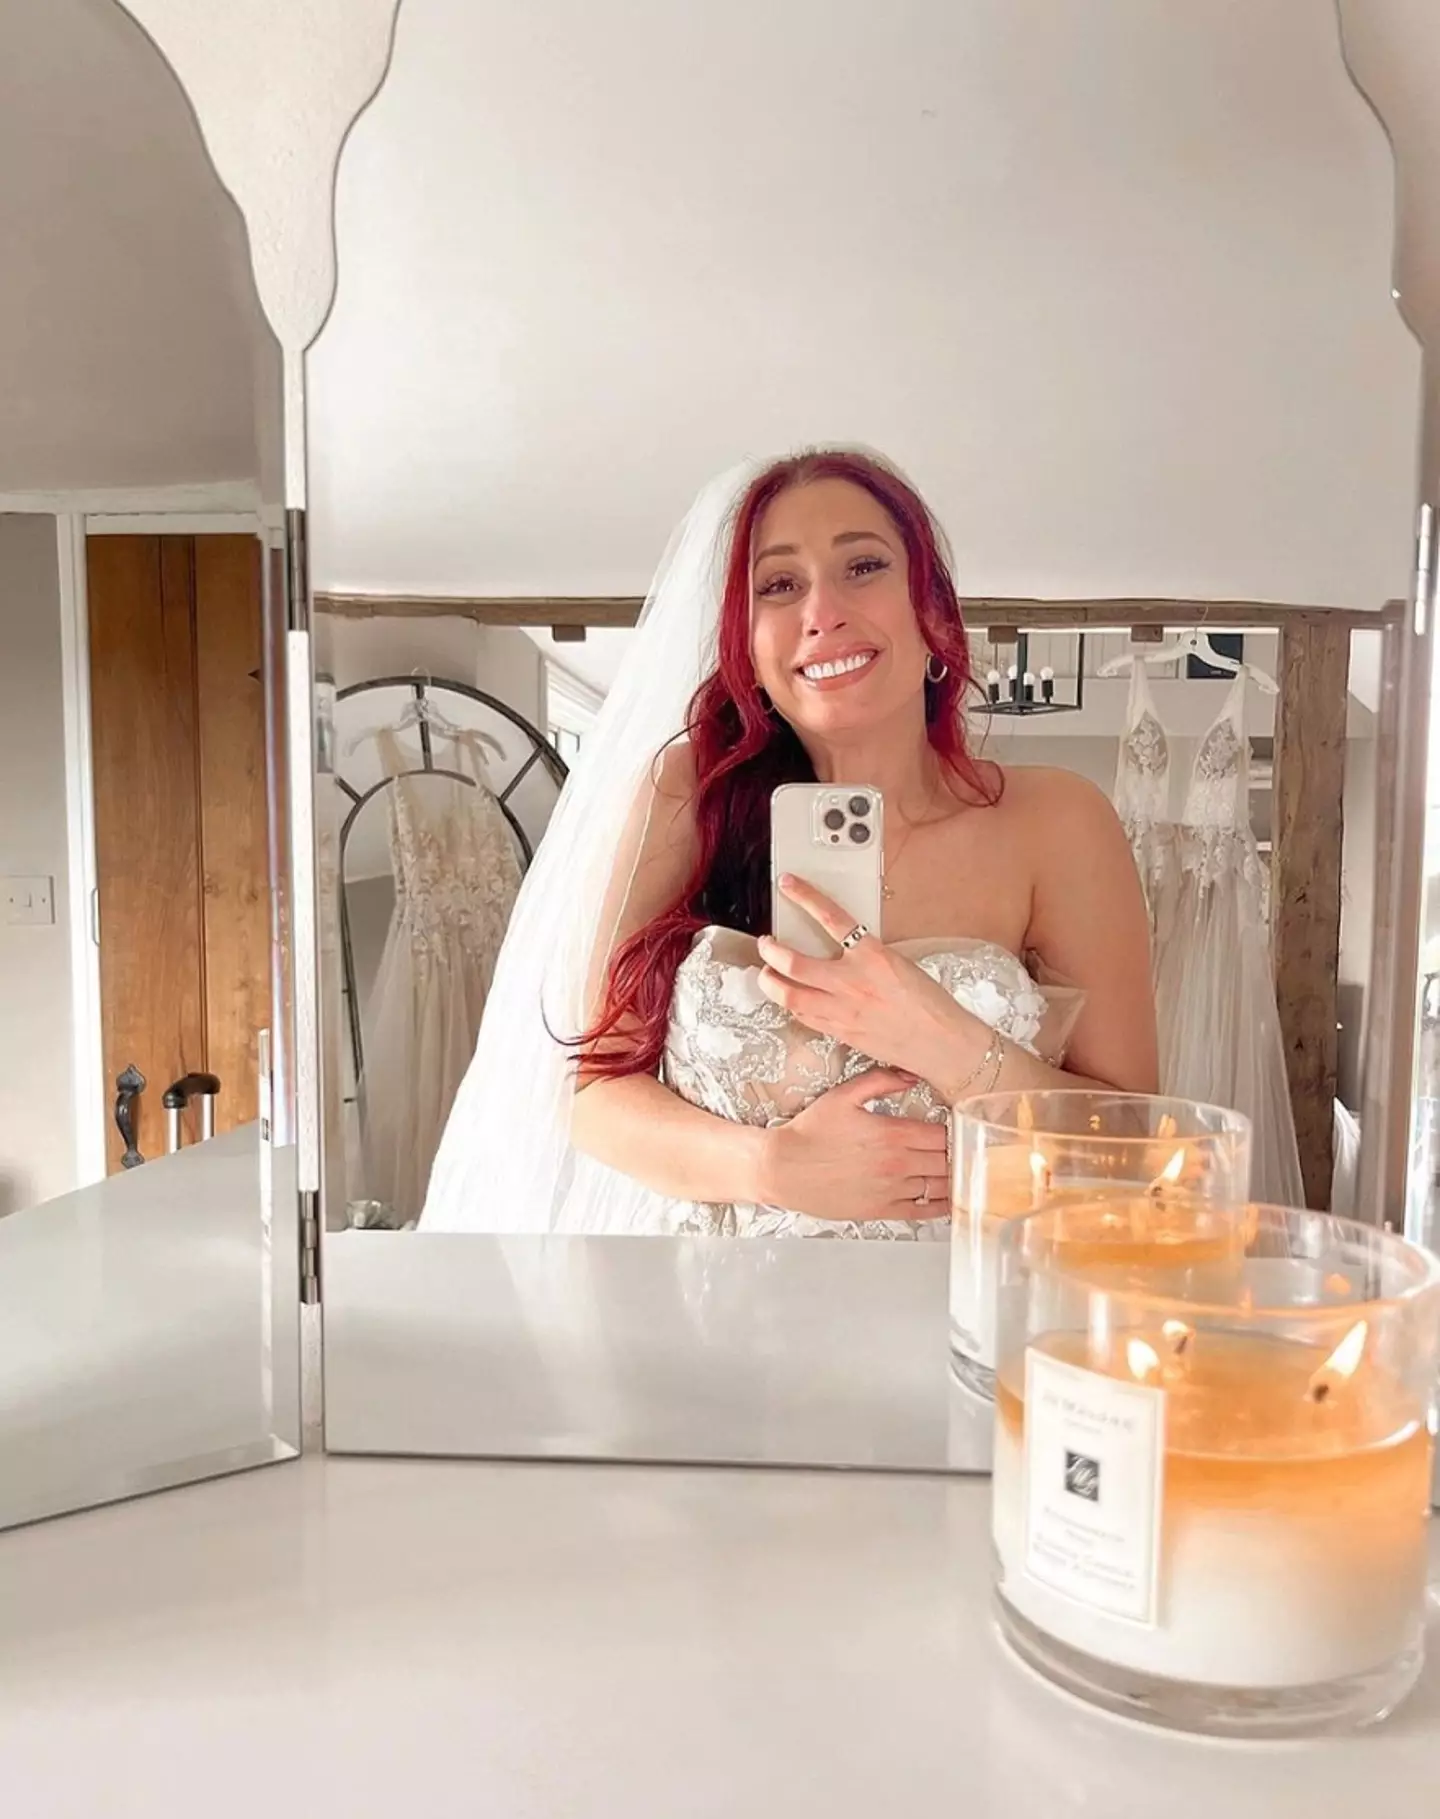 Stacey revealed to her followers that she had chosen her wedding dress back in April.